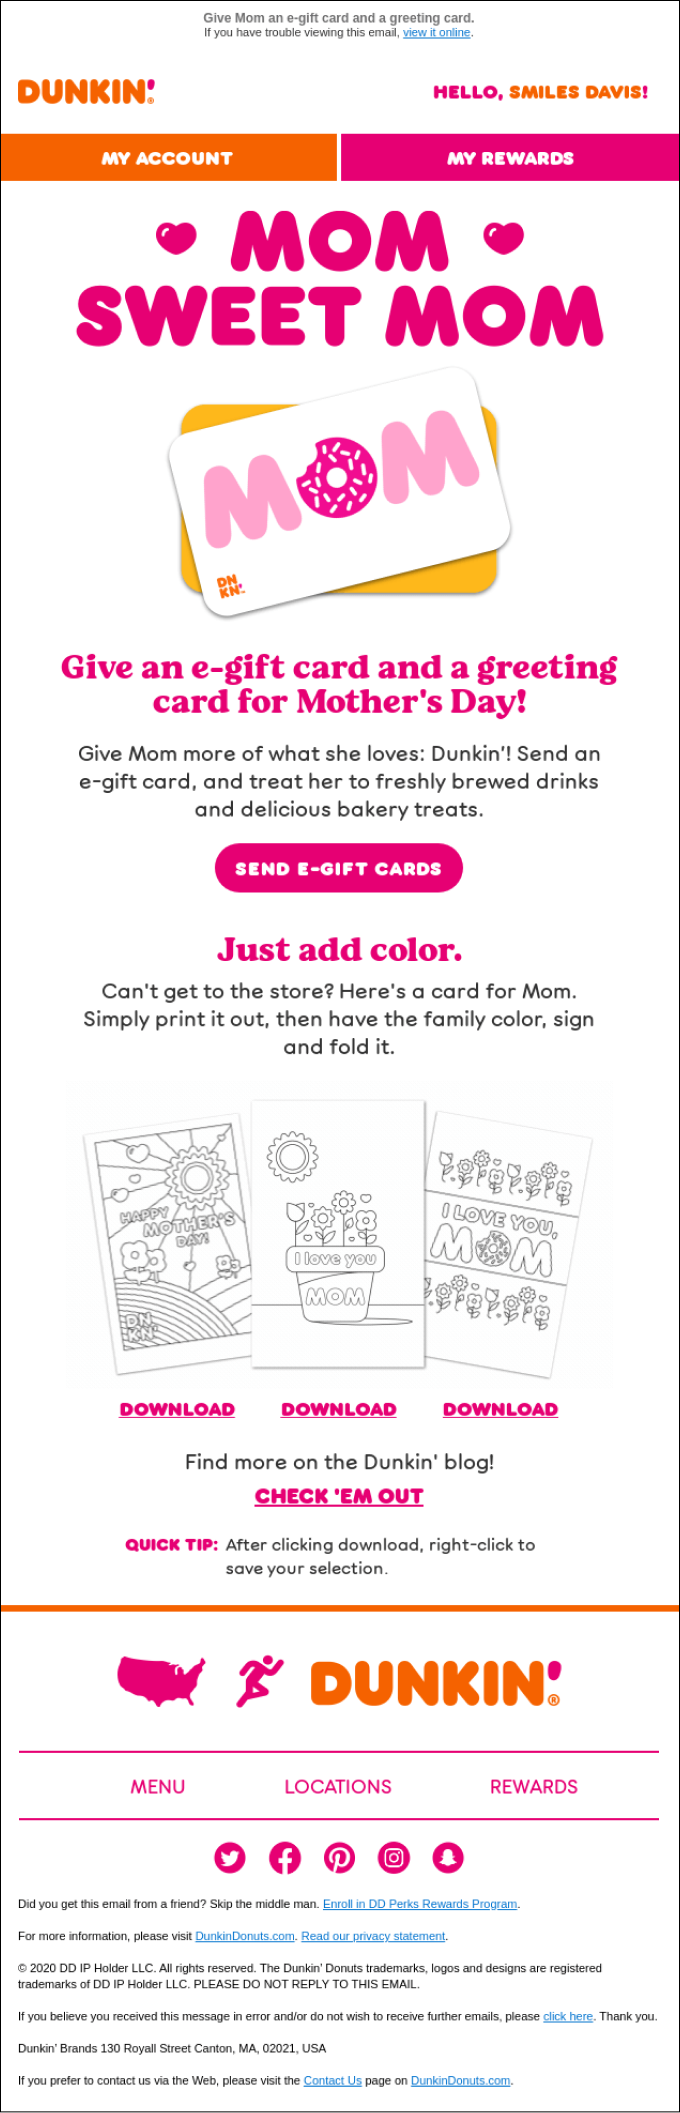 Dunkin Donut's mother's day email ideas